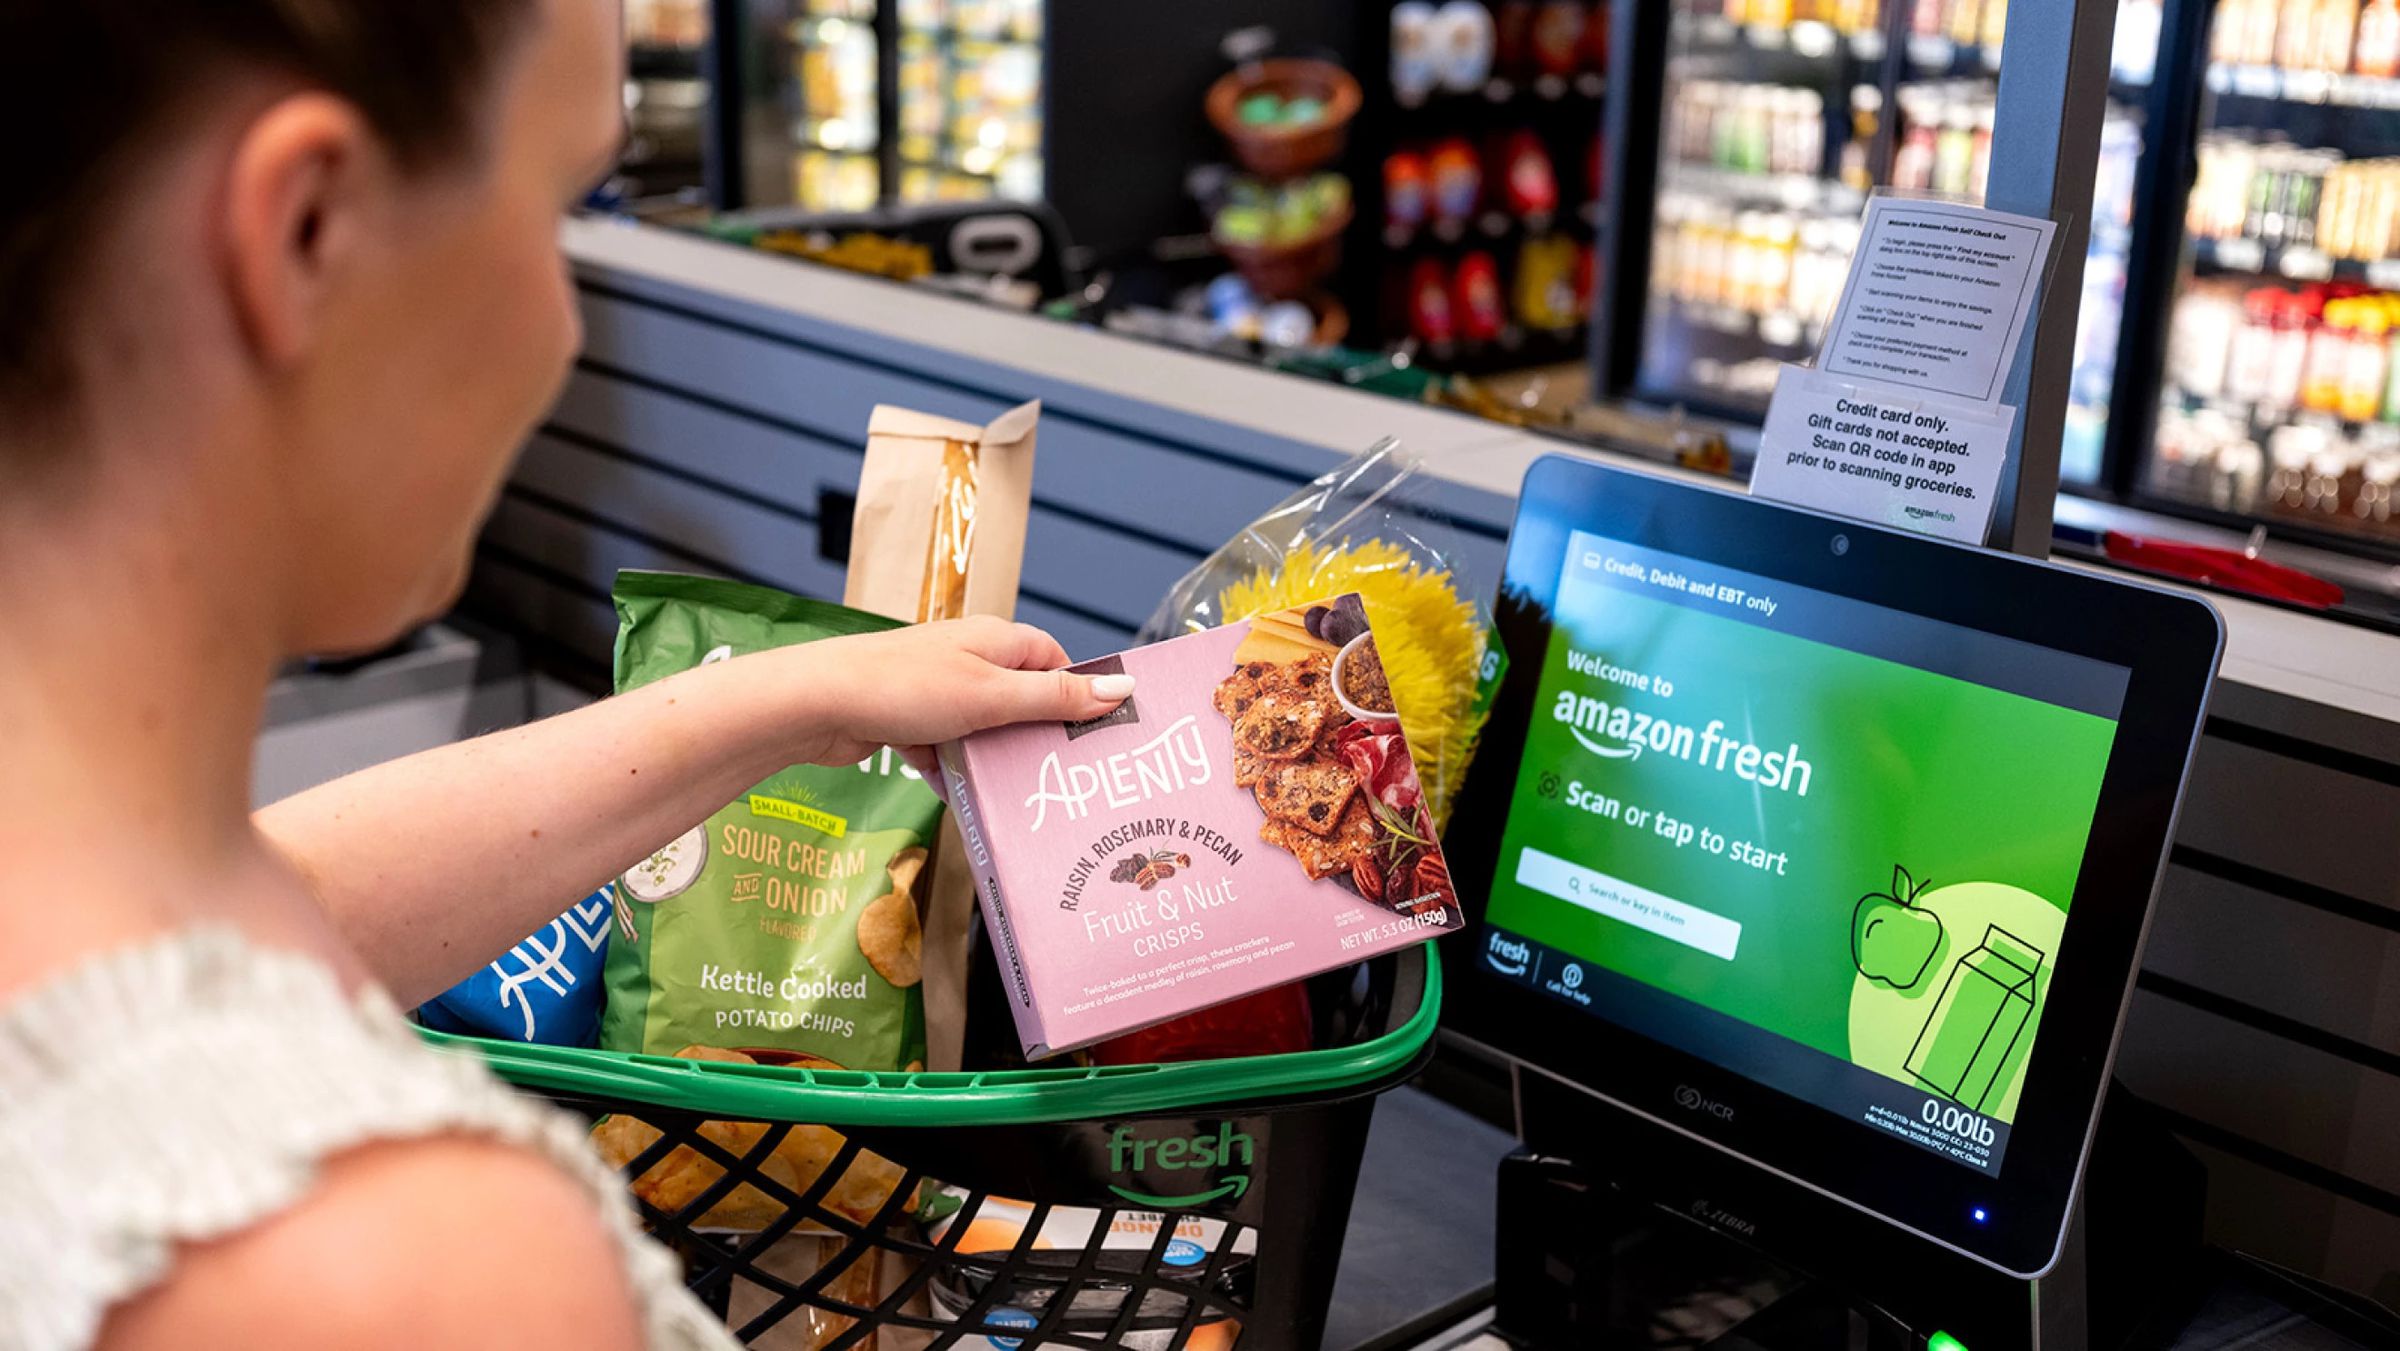 Amazon is adding self-checkout lanes to its Fresh stores.